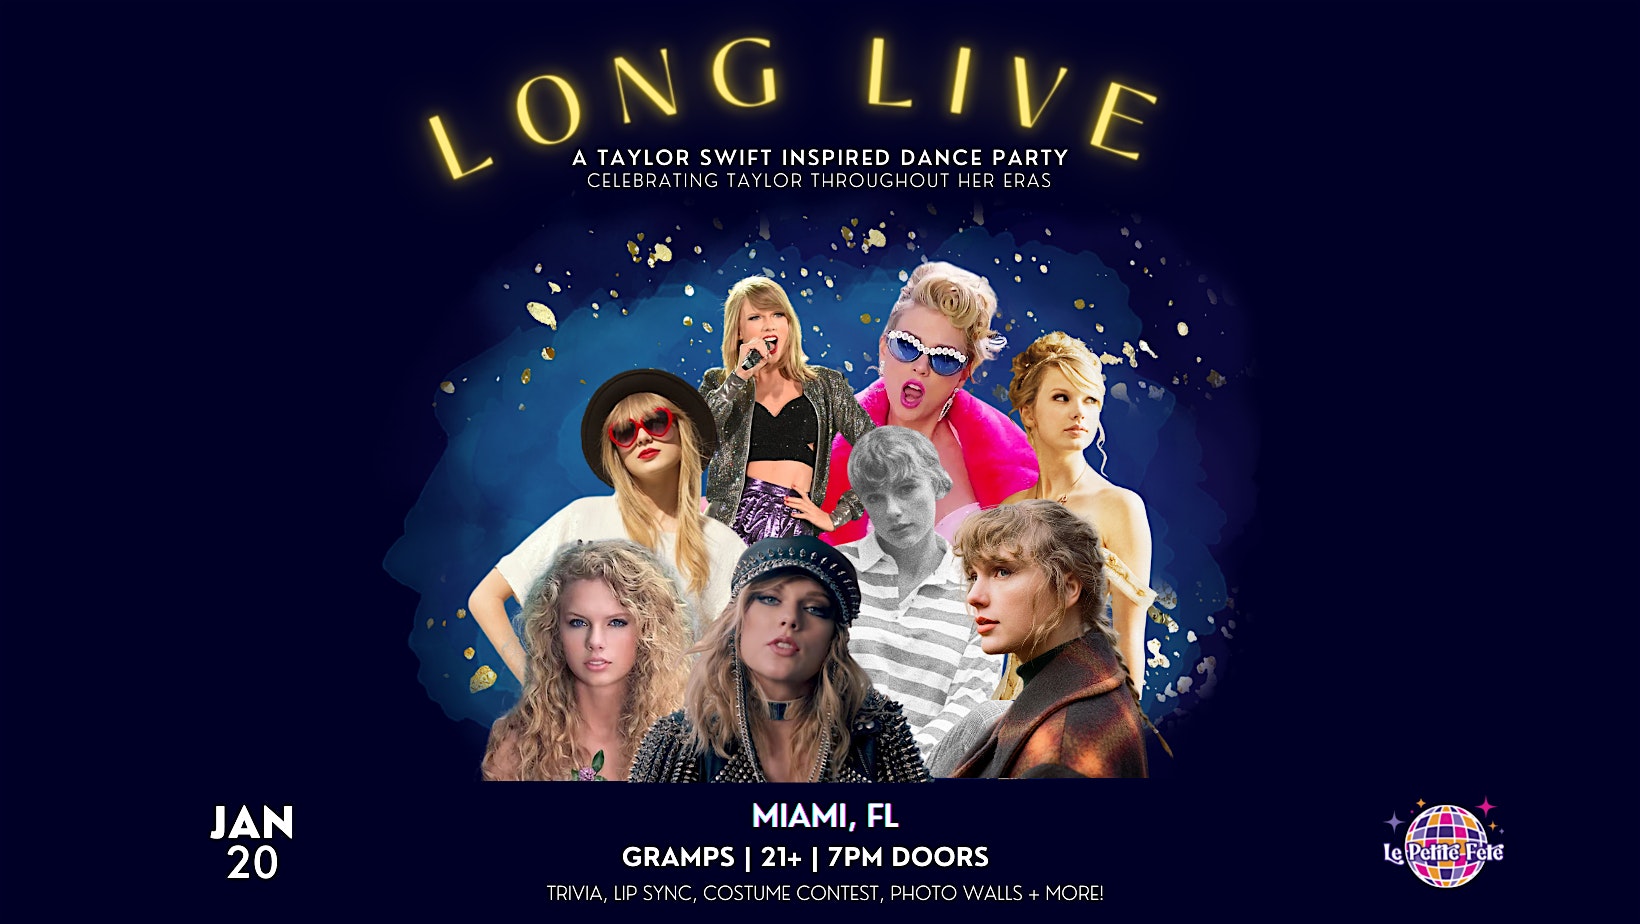 Long Live: A Taylor Swift Inspired Dance Party in Miami at Gramps